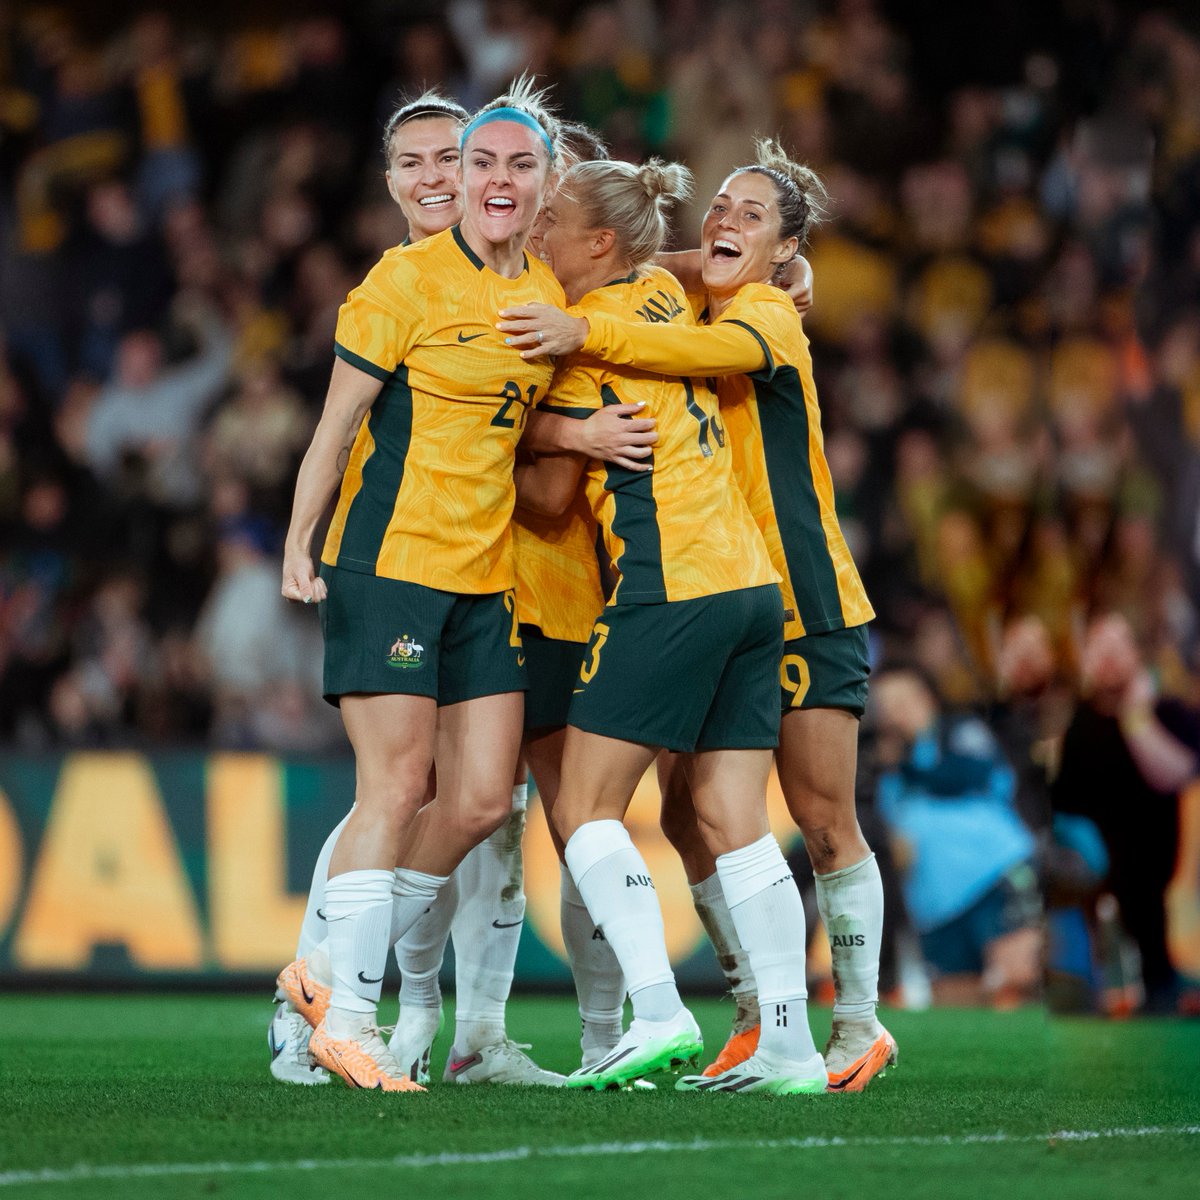 We’re on our way ✈ Thank you for continuing to inspire the nation, CommBank @TheMatildas